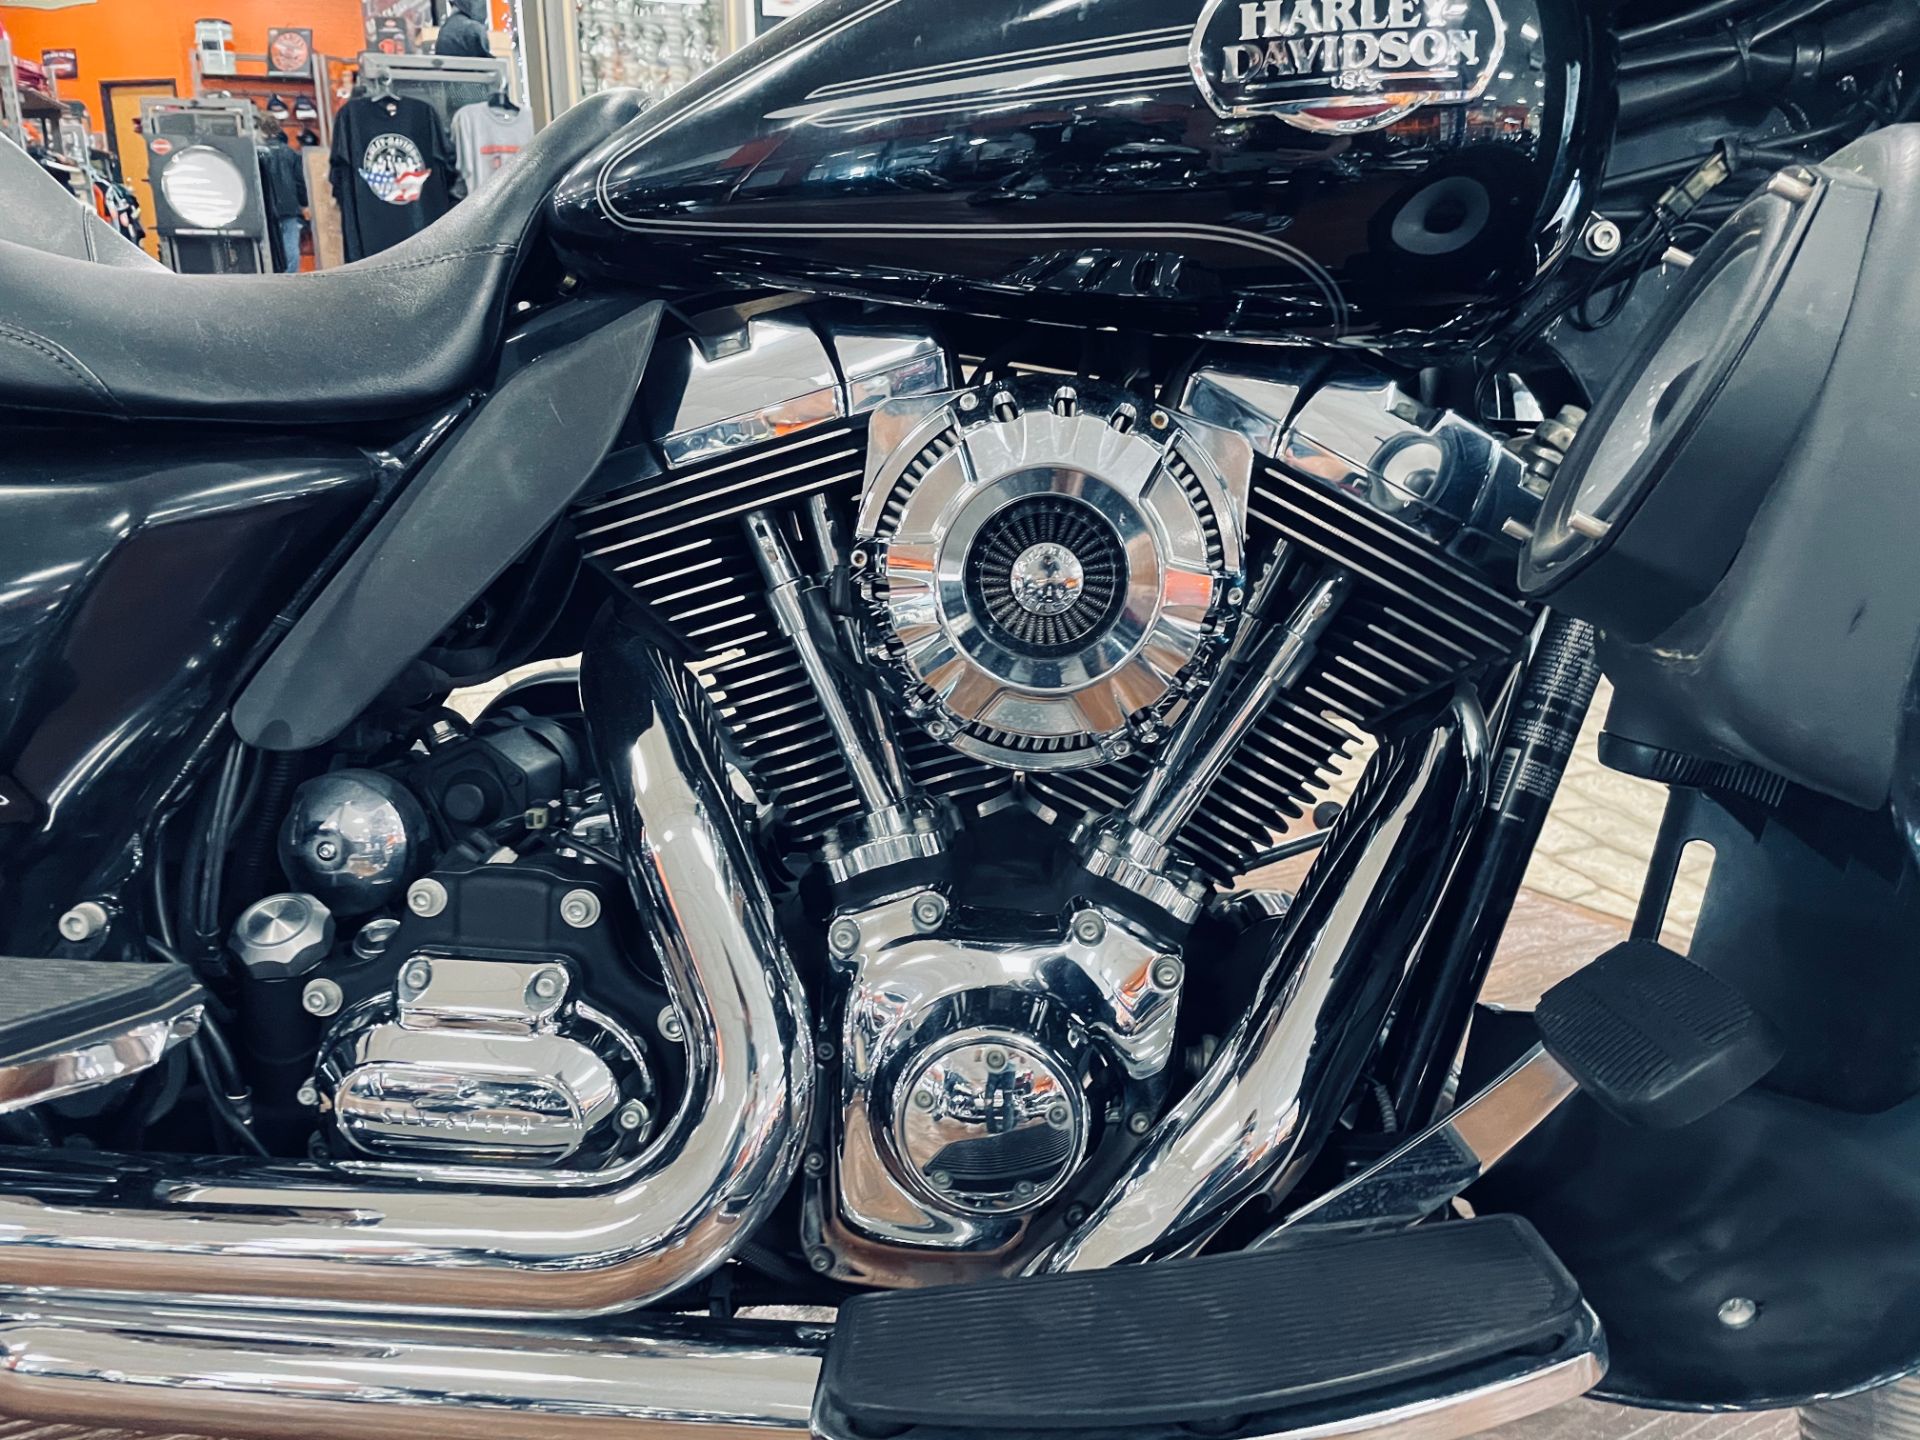 2018 Harley-Davidson Road King Special in Marion, Illinois - Photo 16